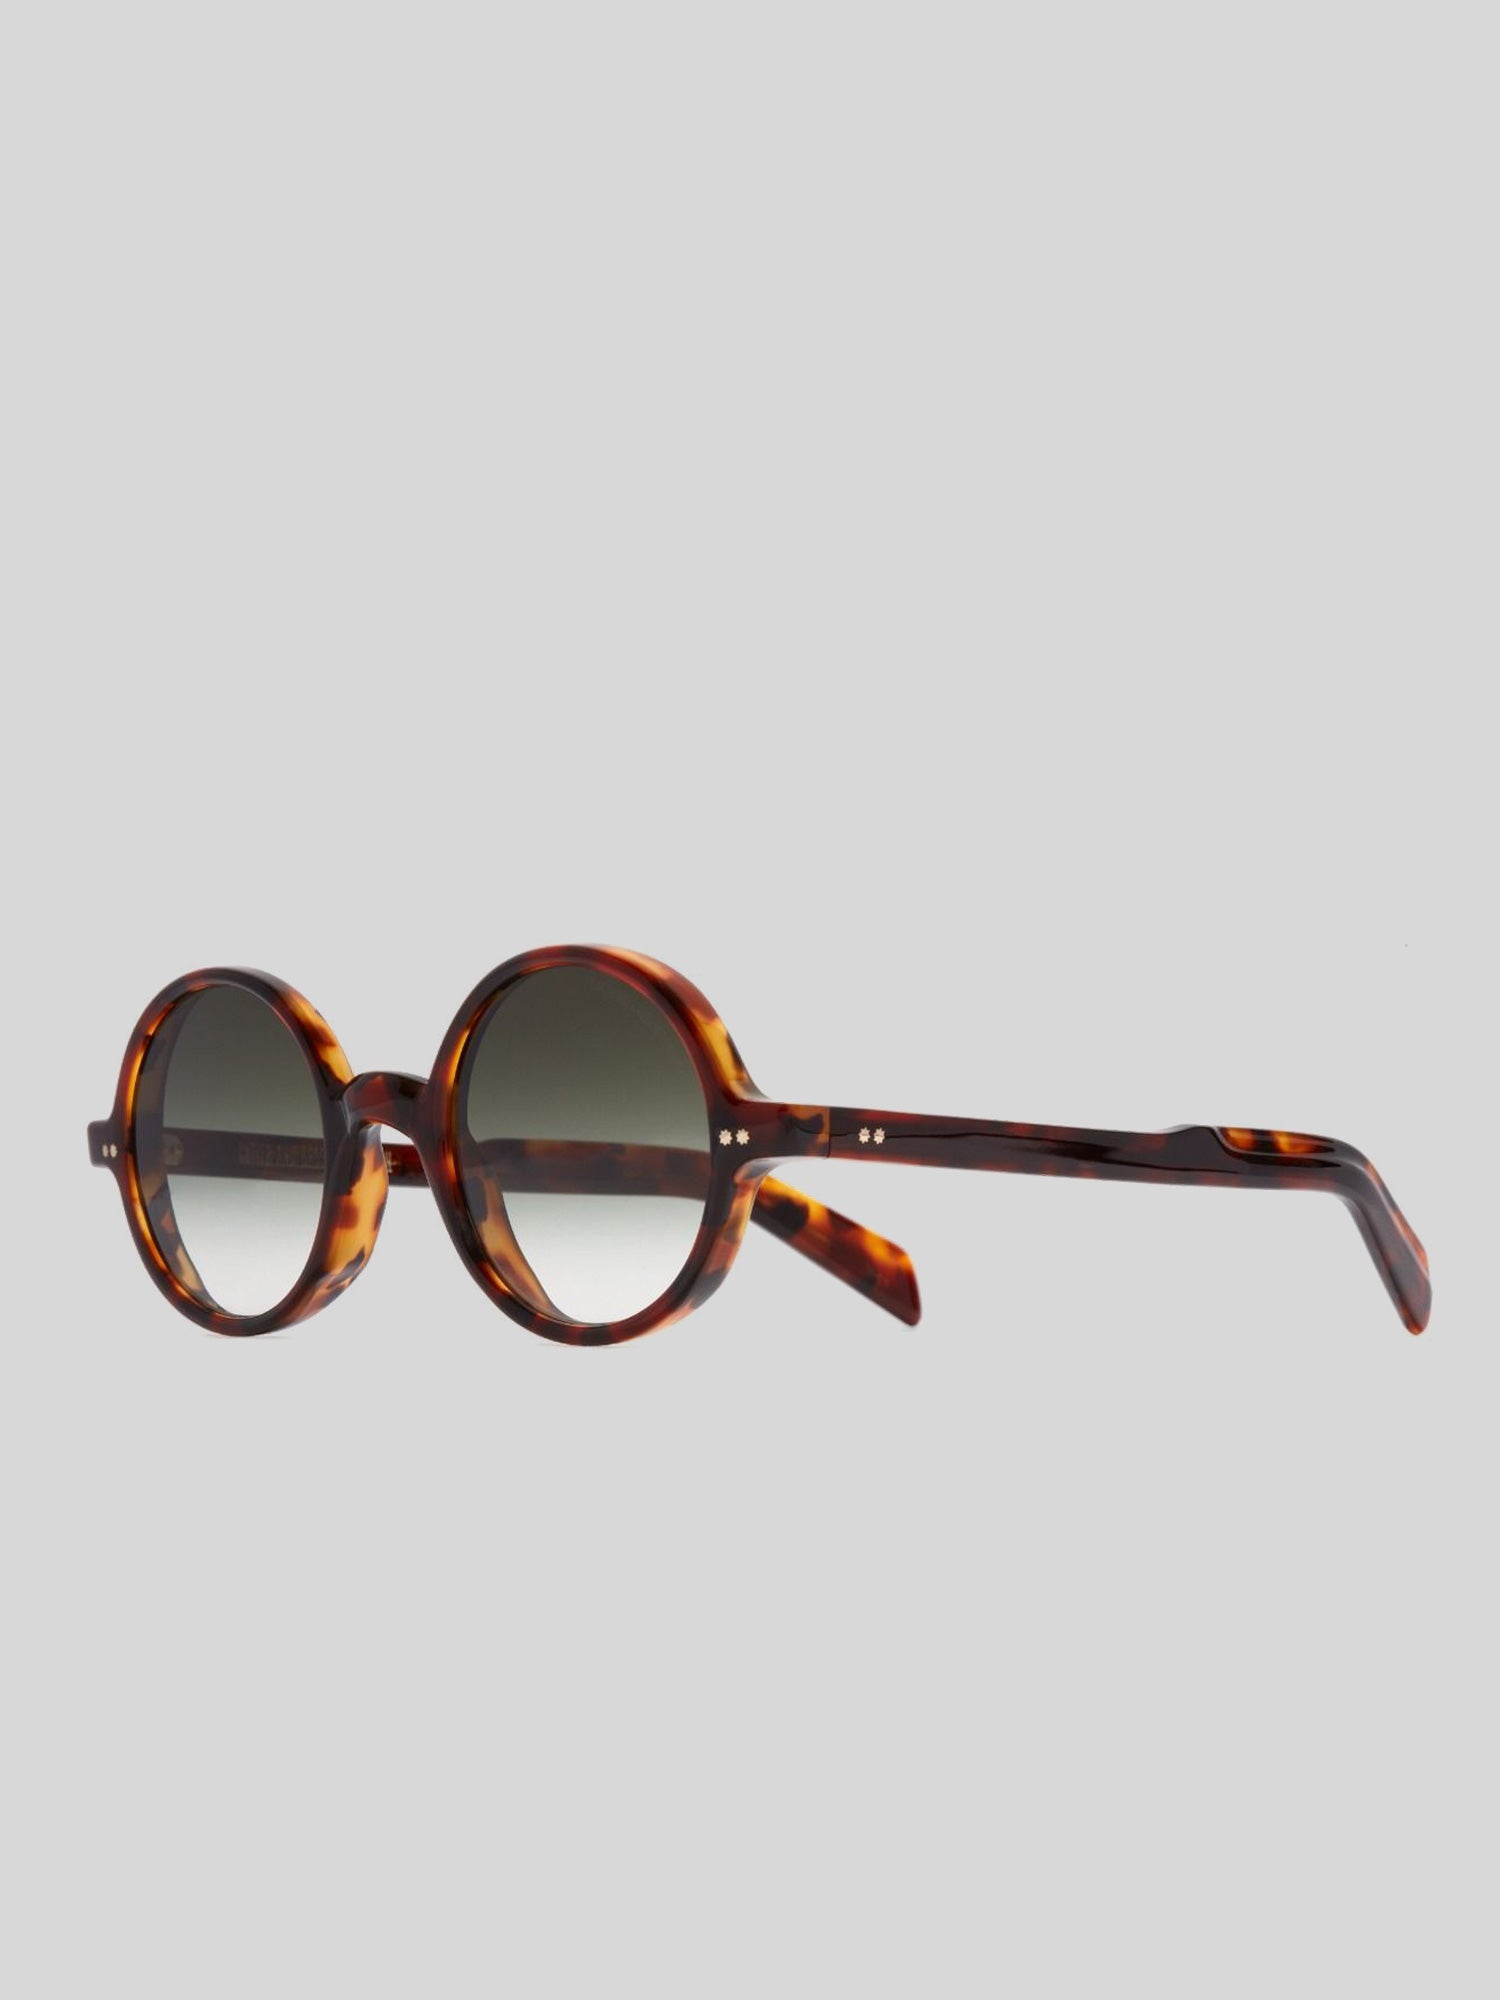 Round sunglasses from Erdem and Cutler & Gross